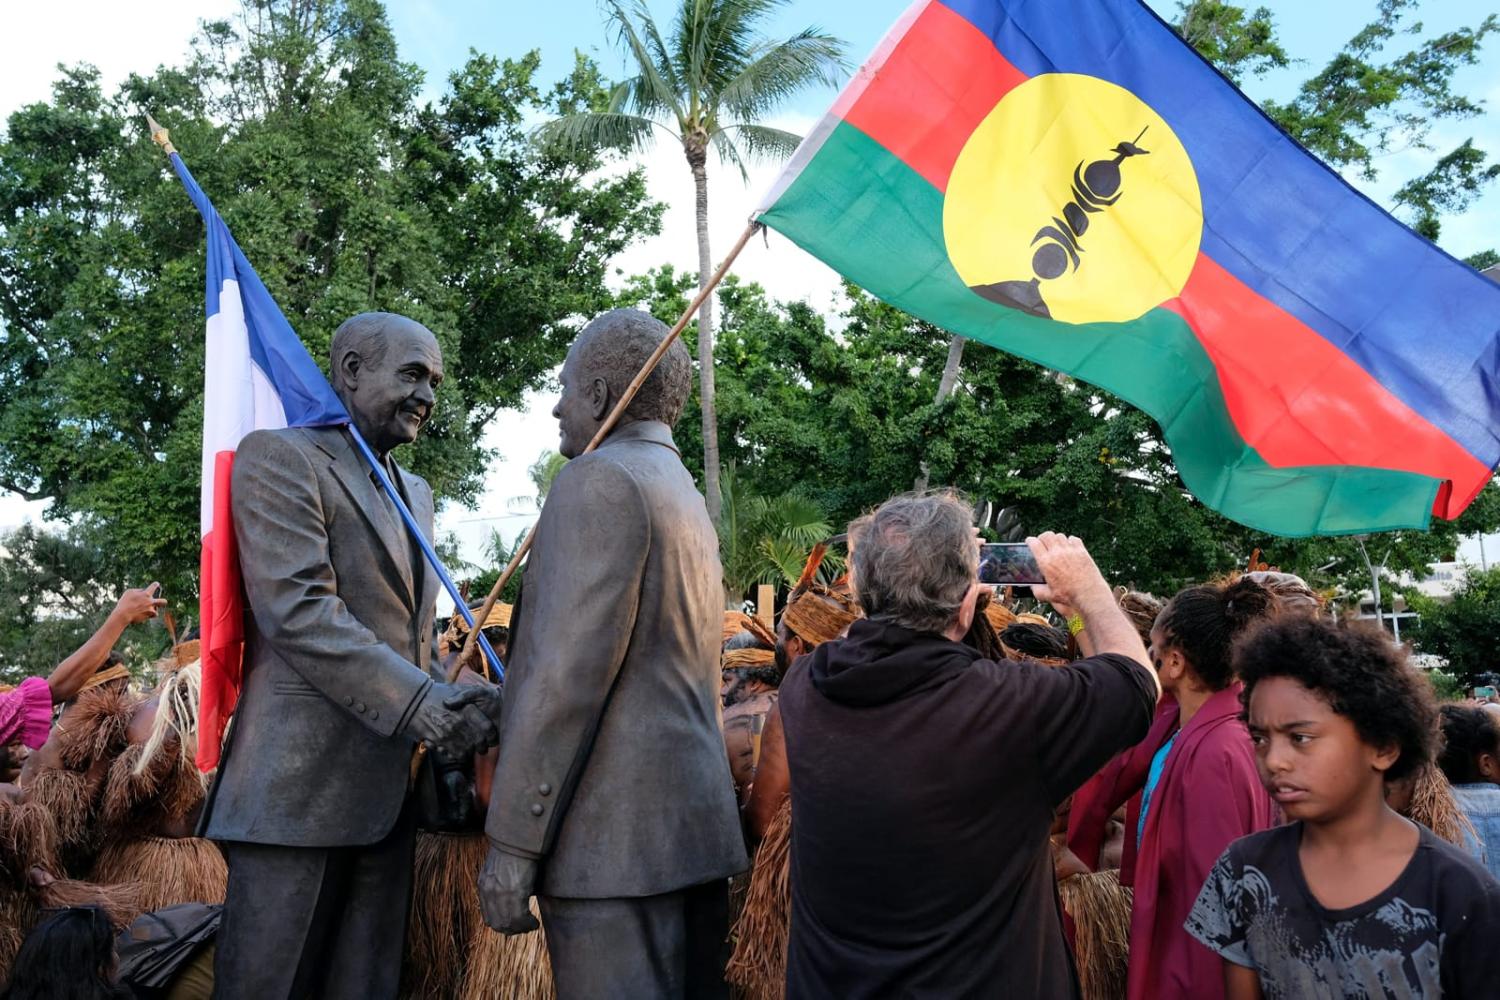 A statue of New Caledonia’s anti-independence leader Jacques Lafleur, left, shaking hands with Kanak independence movement leader Jean-Marie Tjibaou, right, under agreements that eventually led to the 1998 Nouméa Accord (Theo Rouby/AFP via Getty Images)